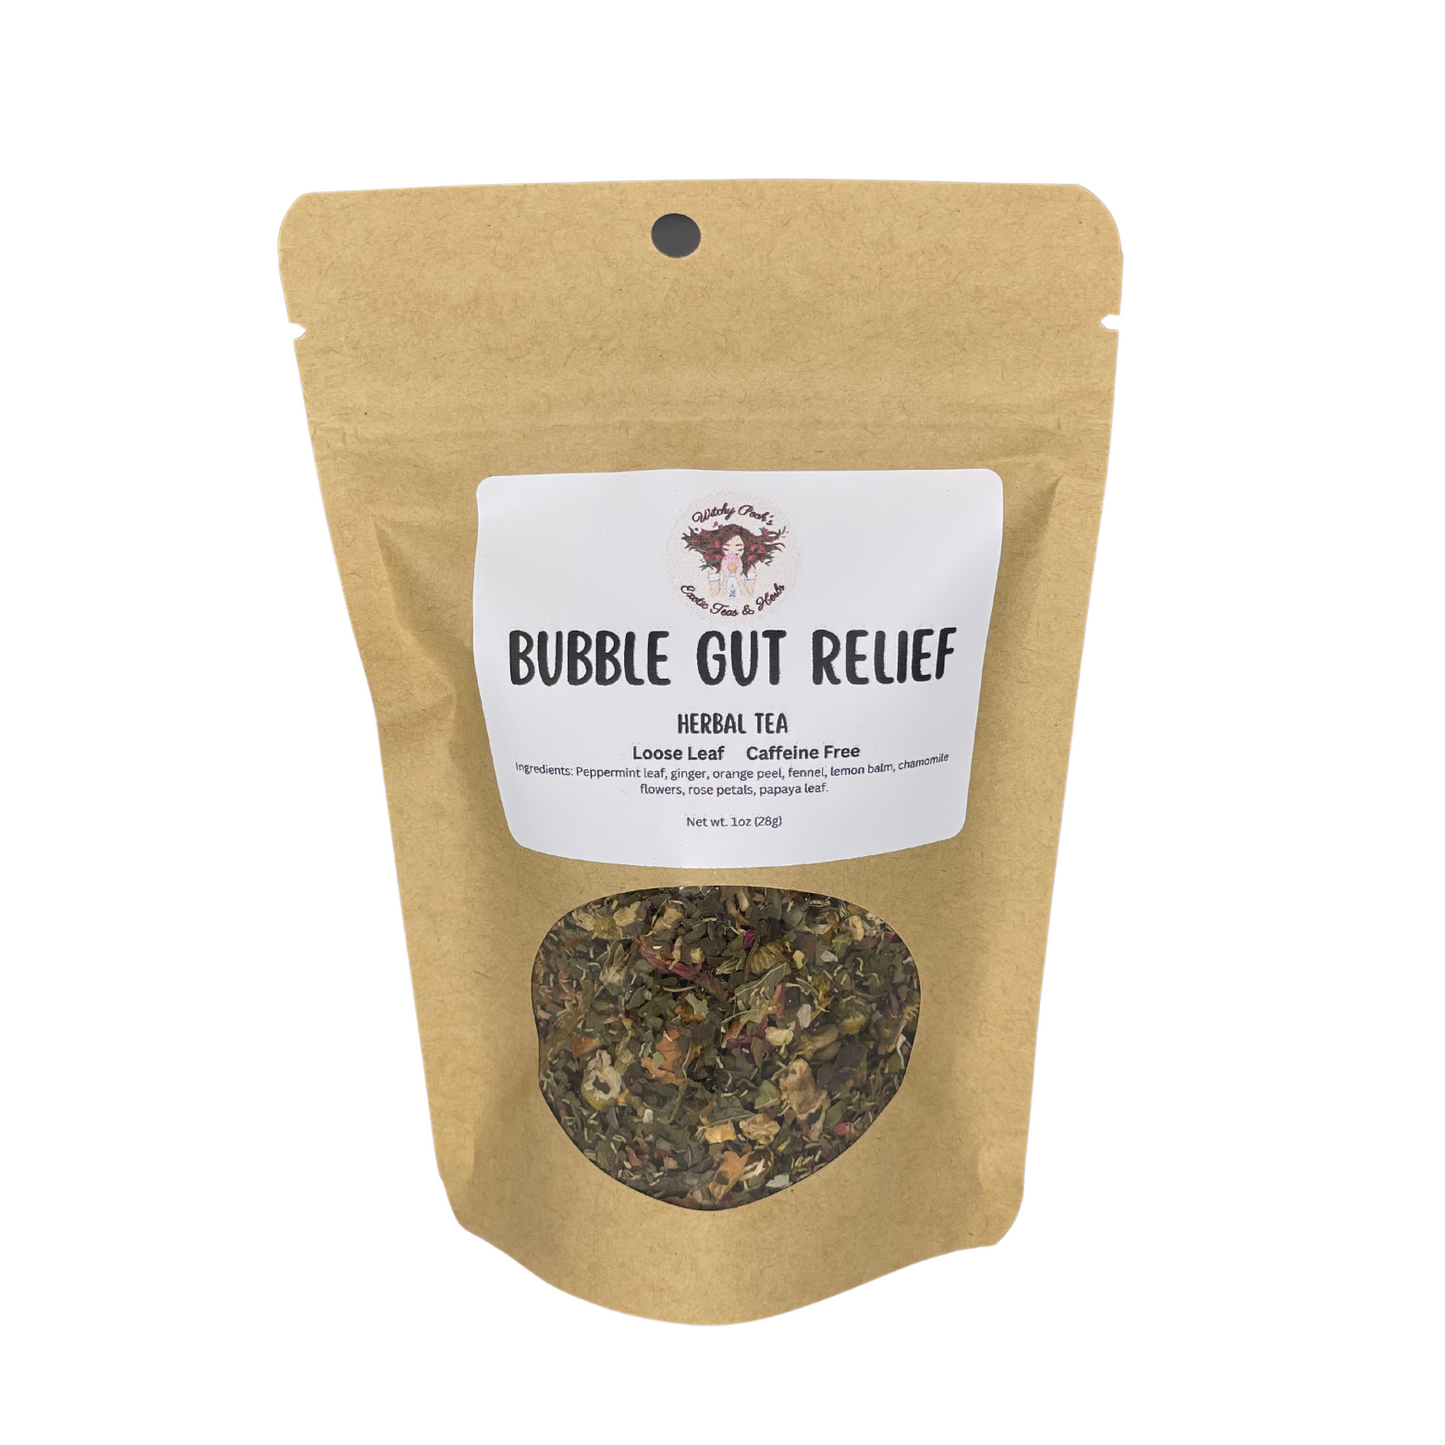 Bubble Gut Relief Loose Leaf Herbal Functional Tea, Caffeine Free, For Digestive Issues